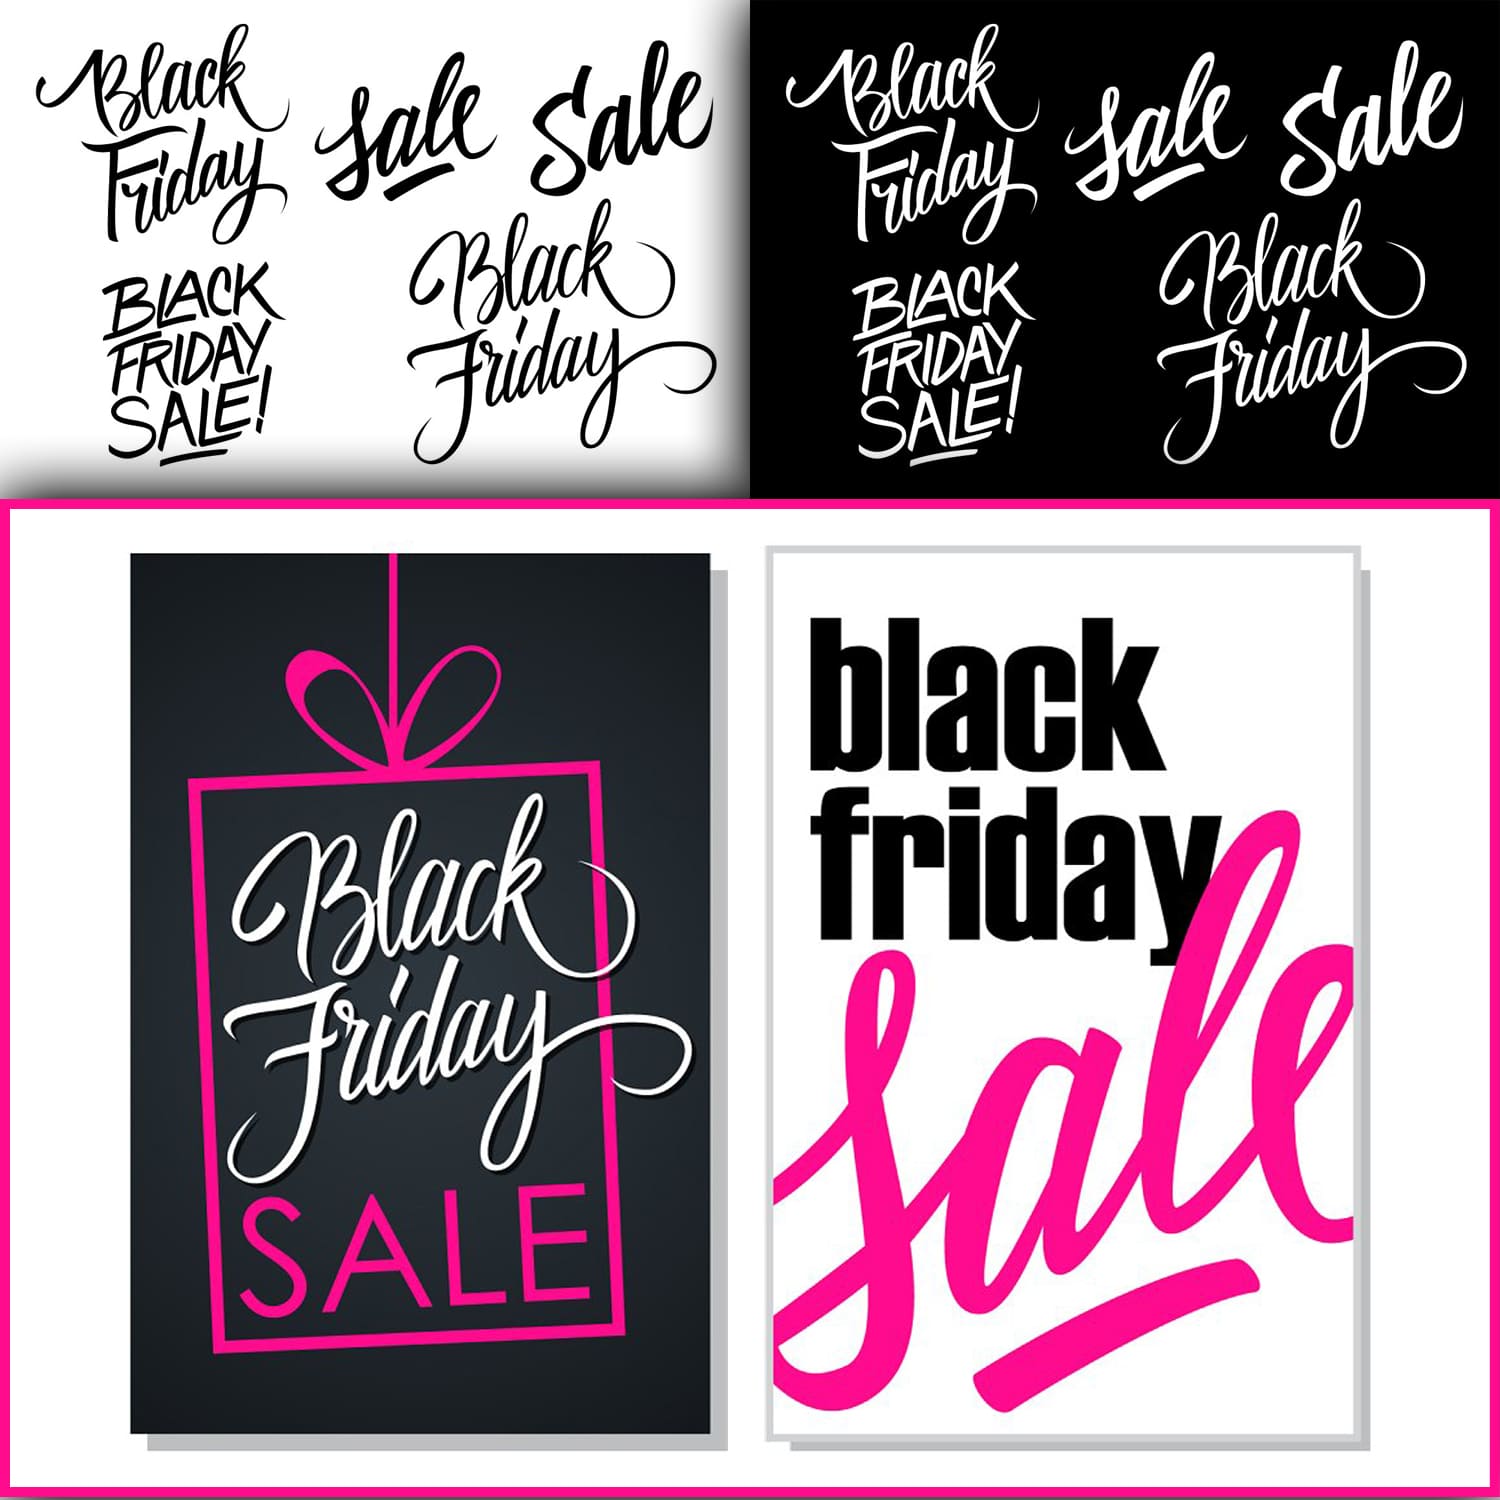 Black Friday Sale Flyers Cover.